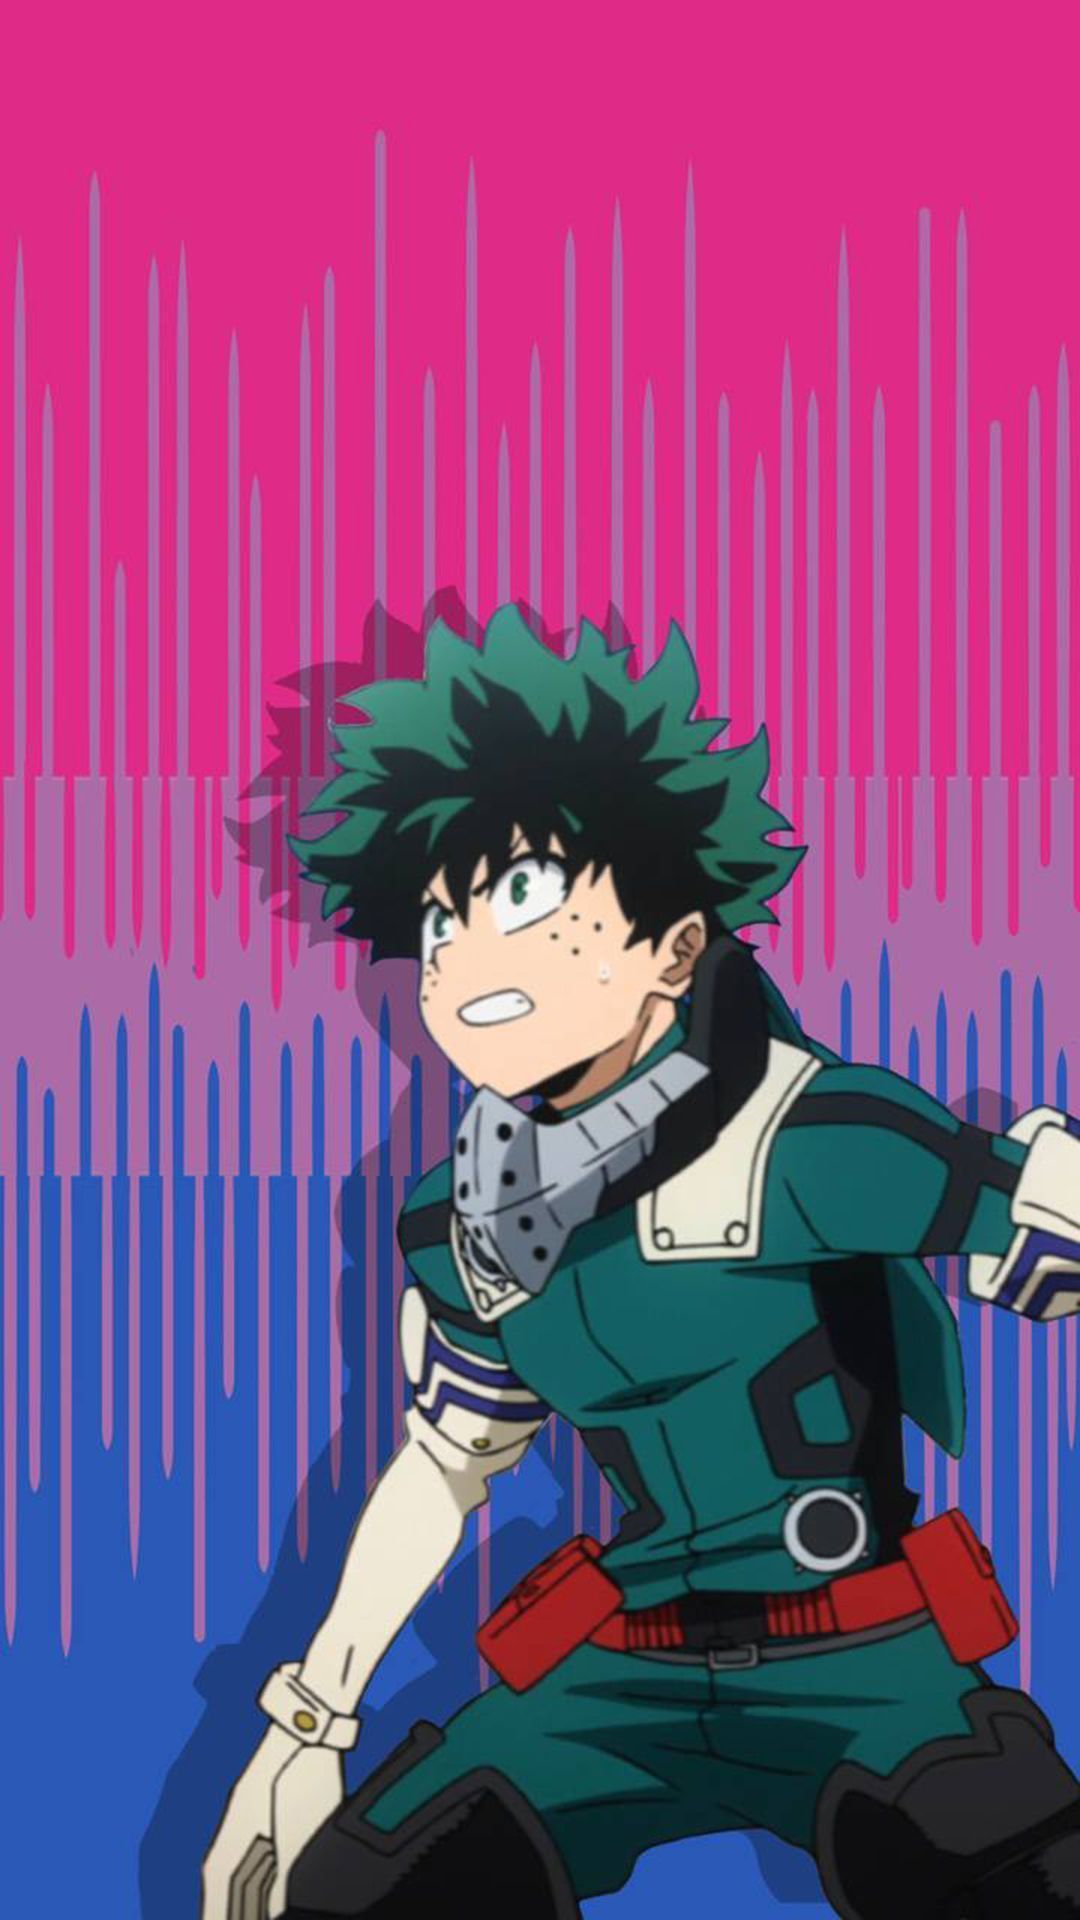 My Hero Academia Wallpaper iPhone with high-resolution 1080x1920 pixel. You can use this wallpaper for your iPhone 5, 6, 7, 8, X, XS, XR backgrounds, Mobile Screensaver, or iPad Lock Screen - Deku